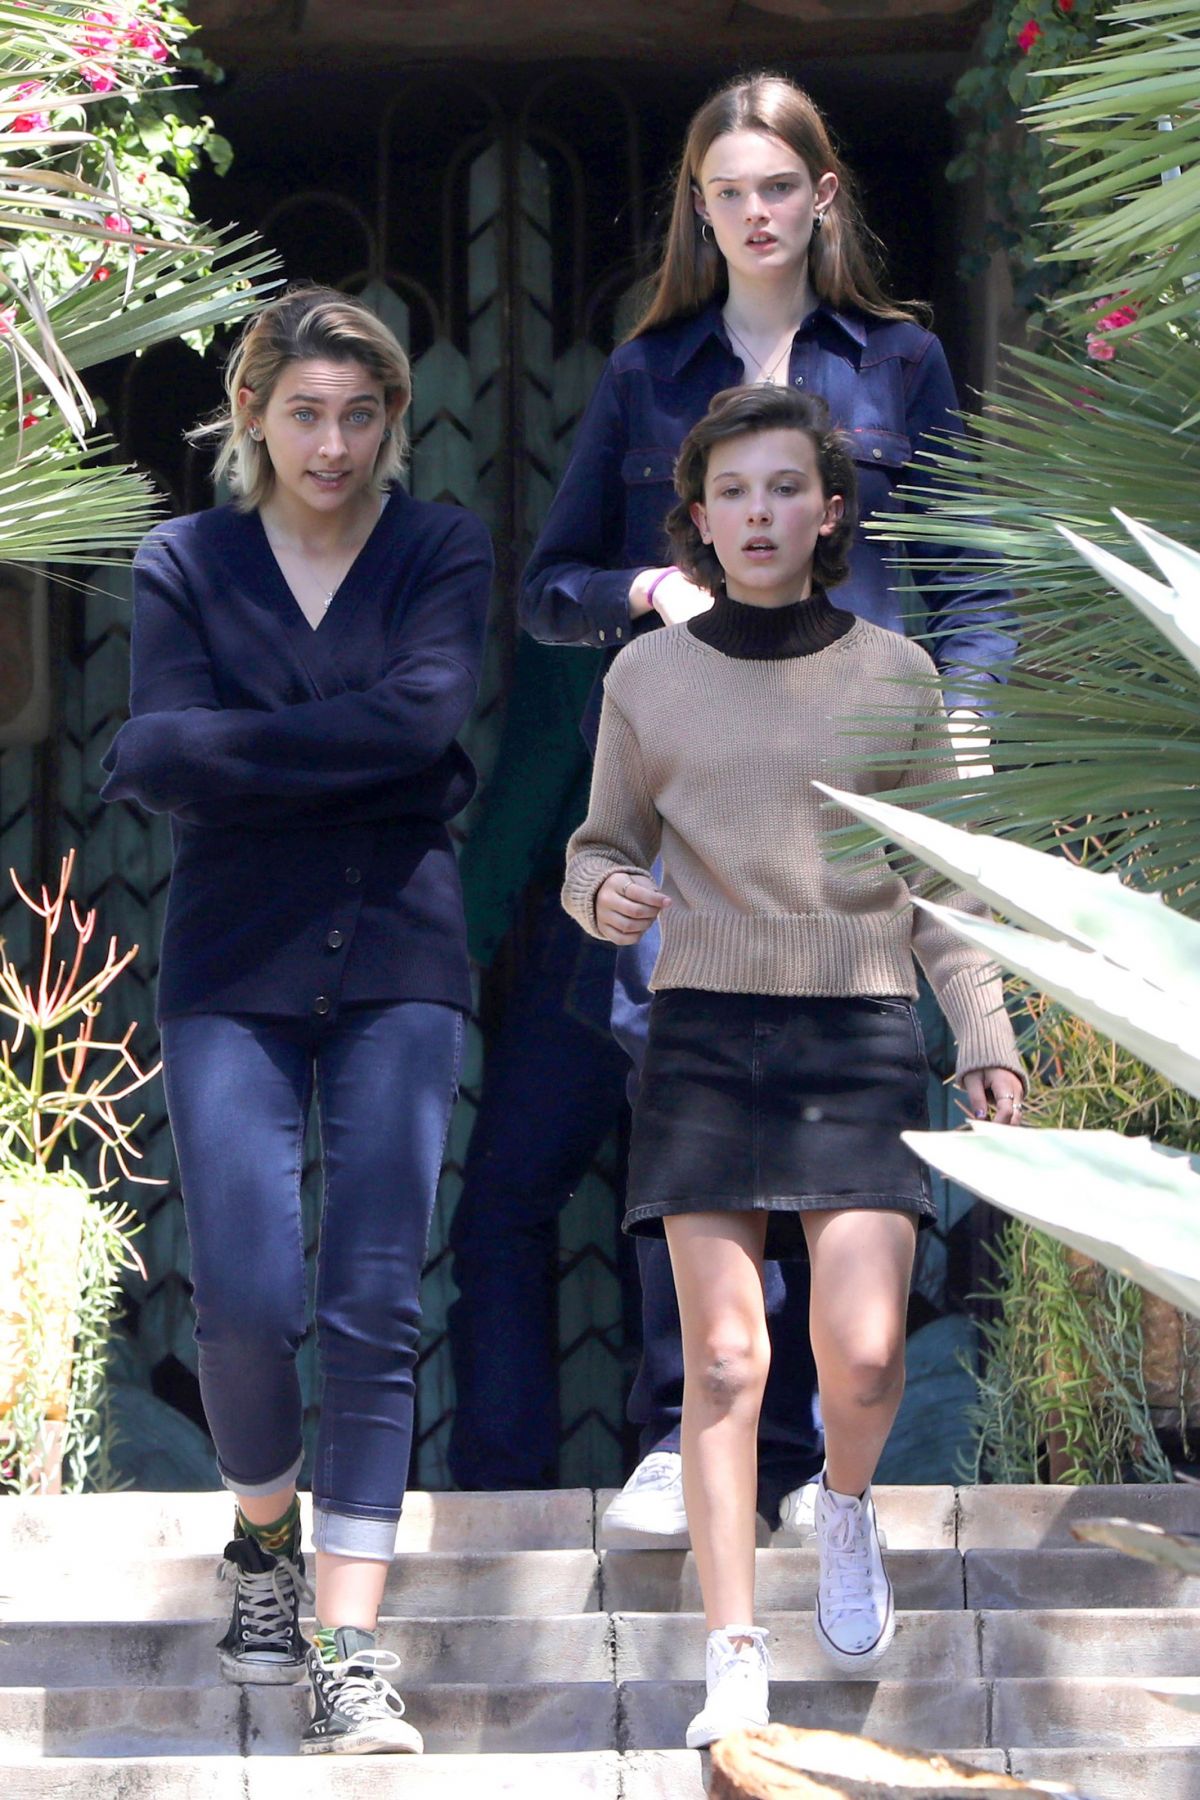 PARIS JACKSON and MILLIE BOBBY BROWN on the Set of Black Dhalia House in Los Angeles ...